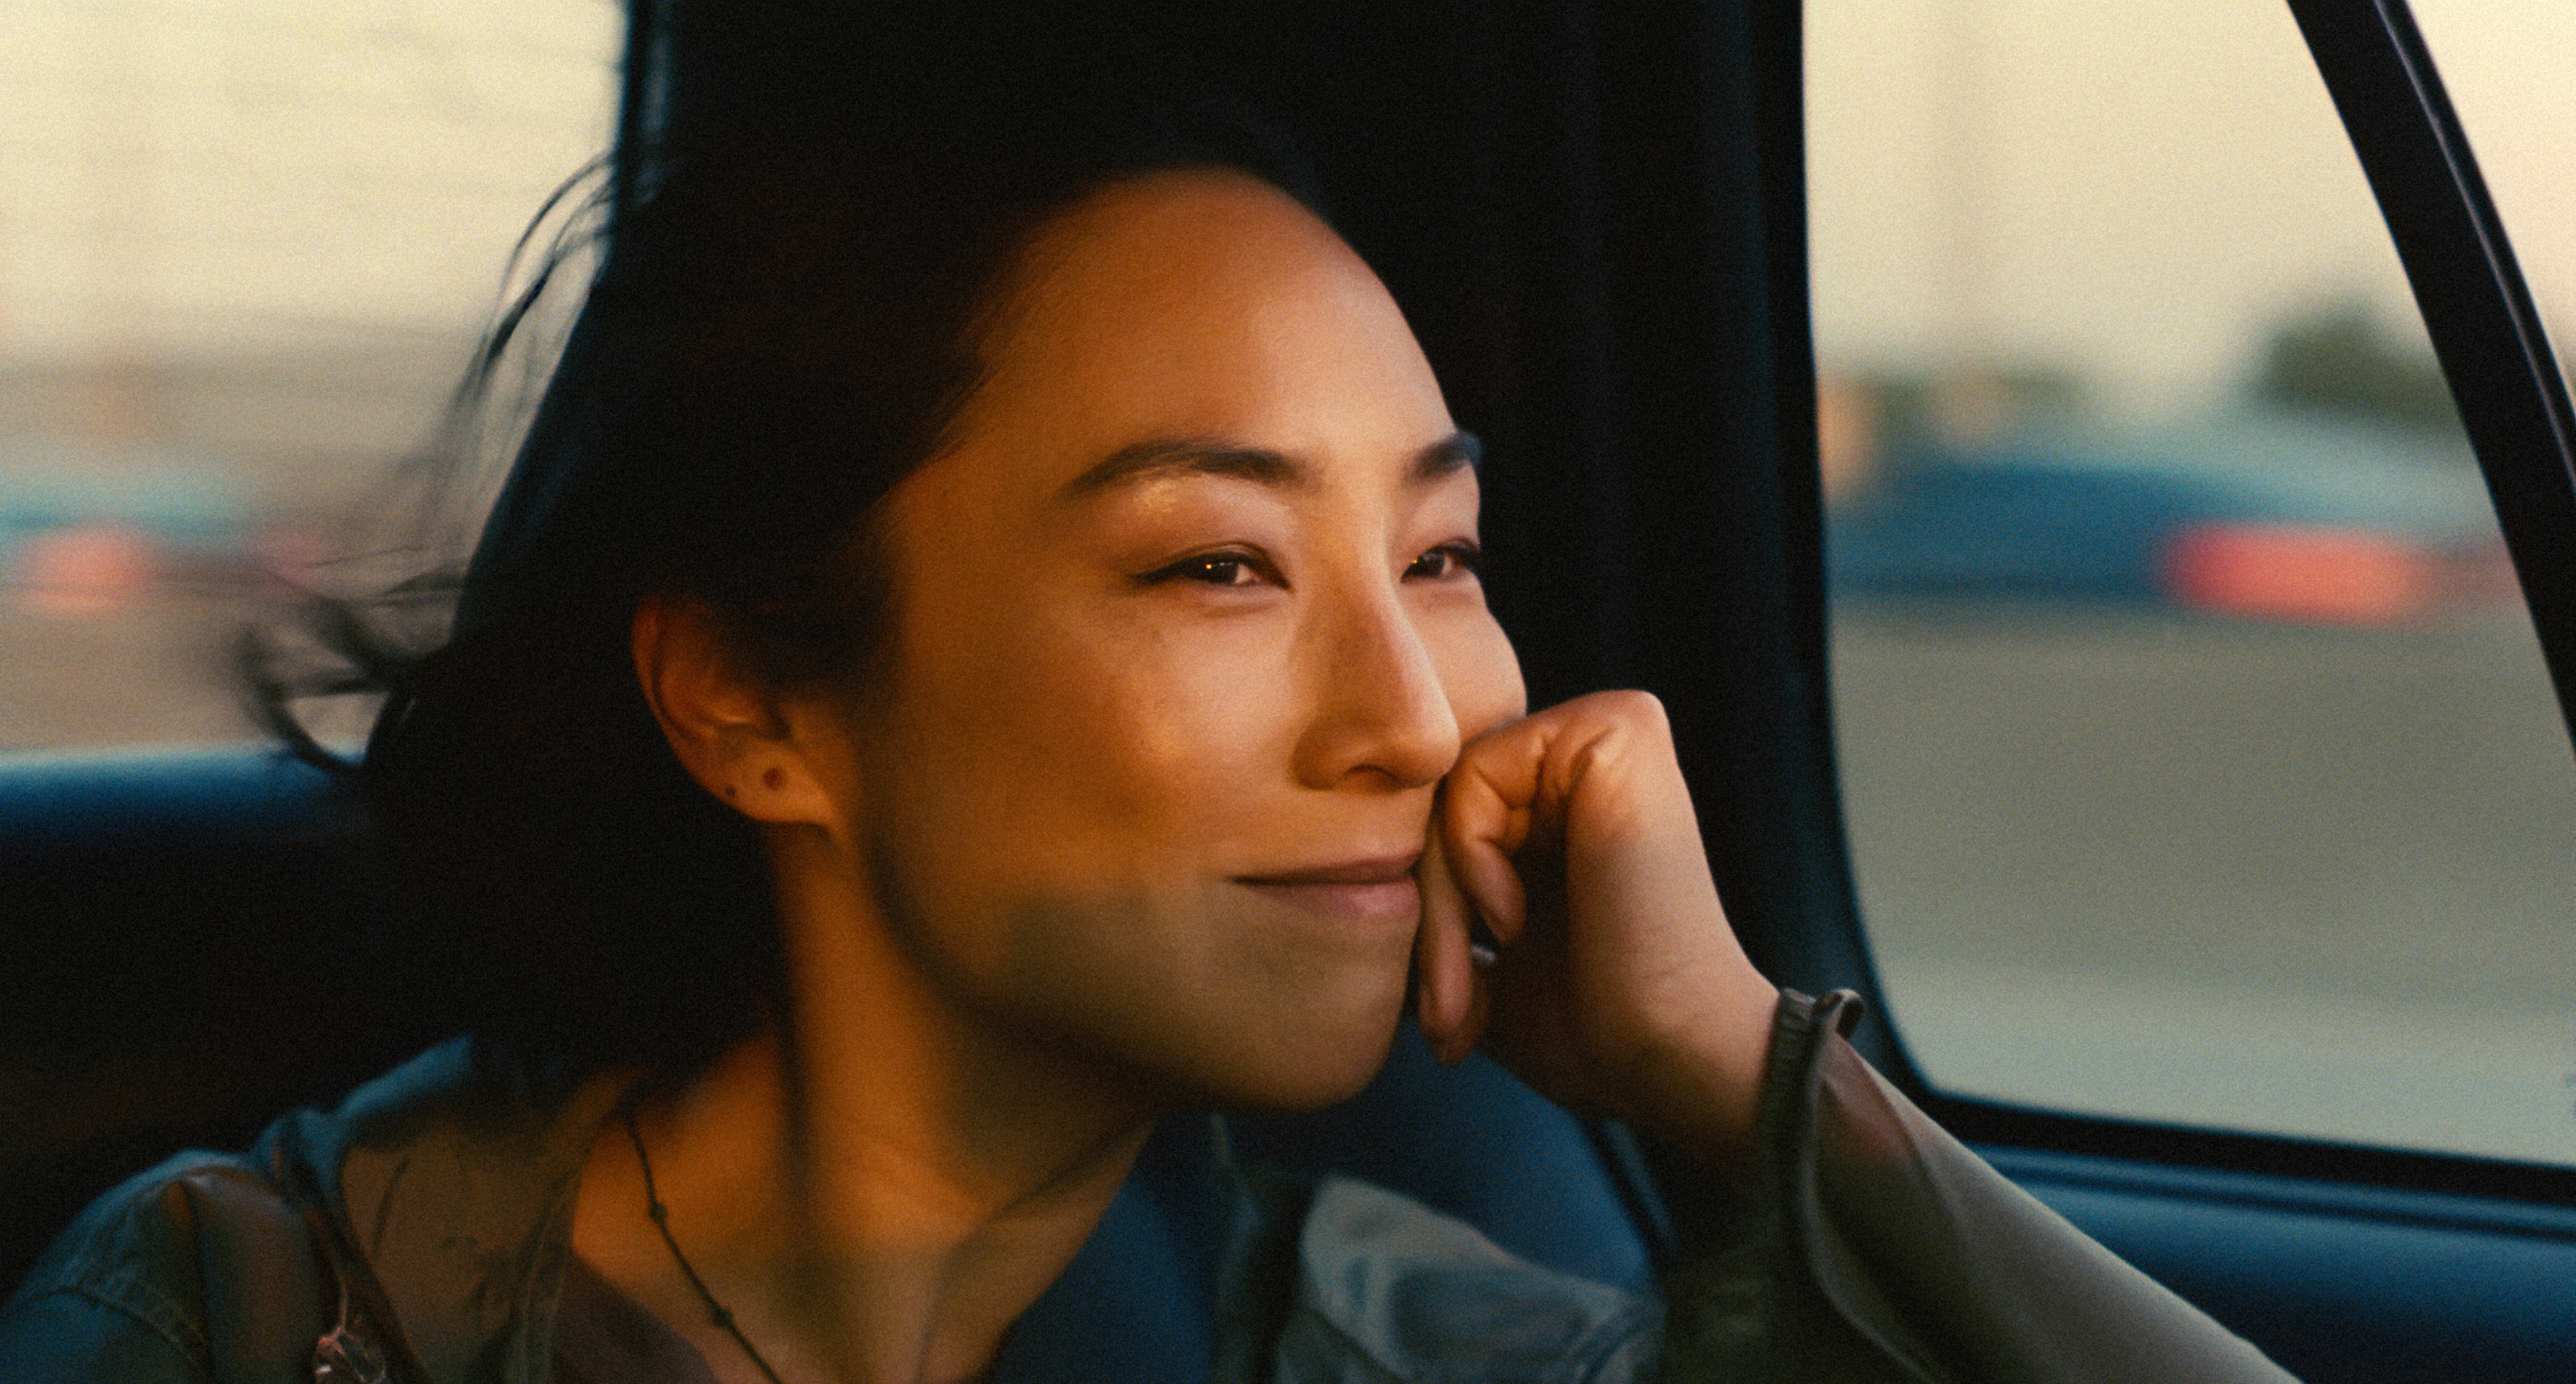 Asian woman smiles while holding her hand to her face sitting in a car.